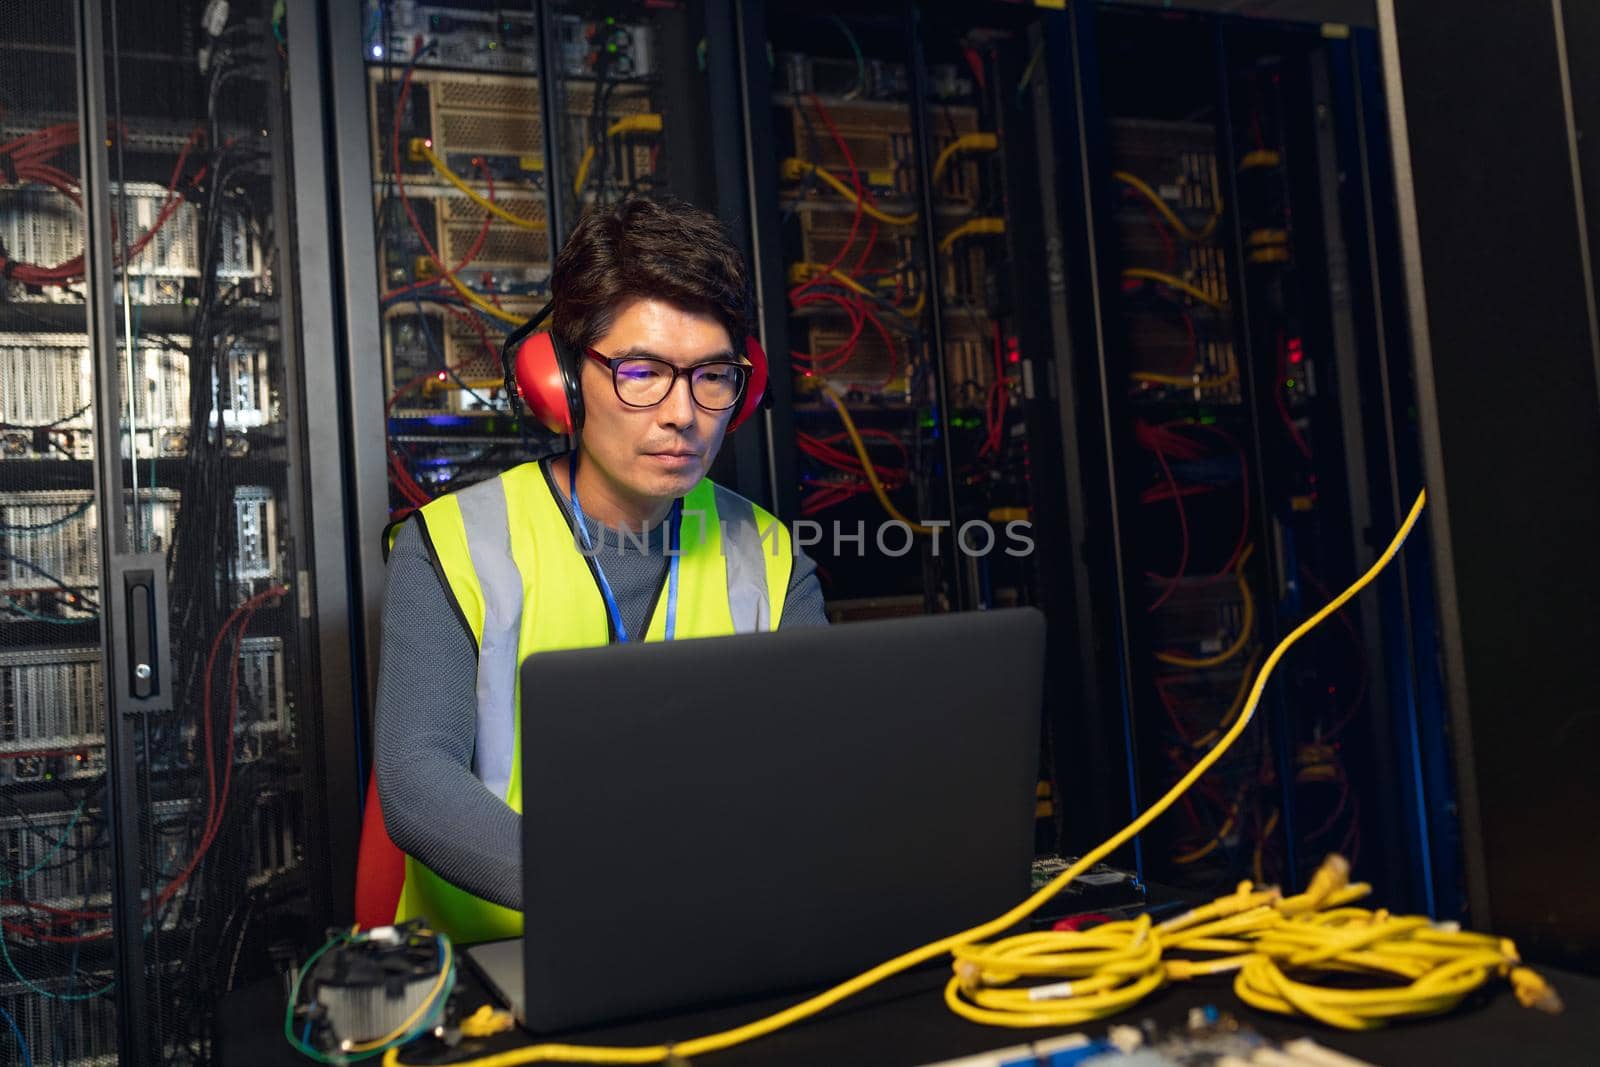 Asian male engineer wearing ear plugs using a laptop in computer server room. database server management and maintenance concept